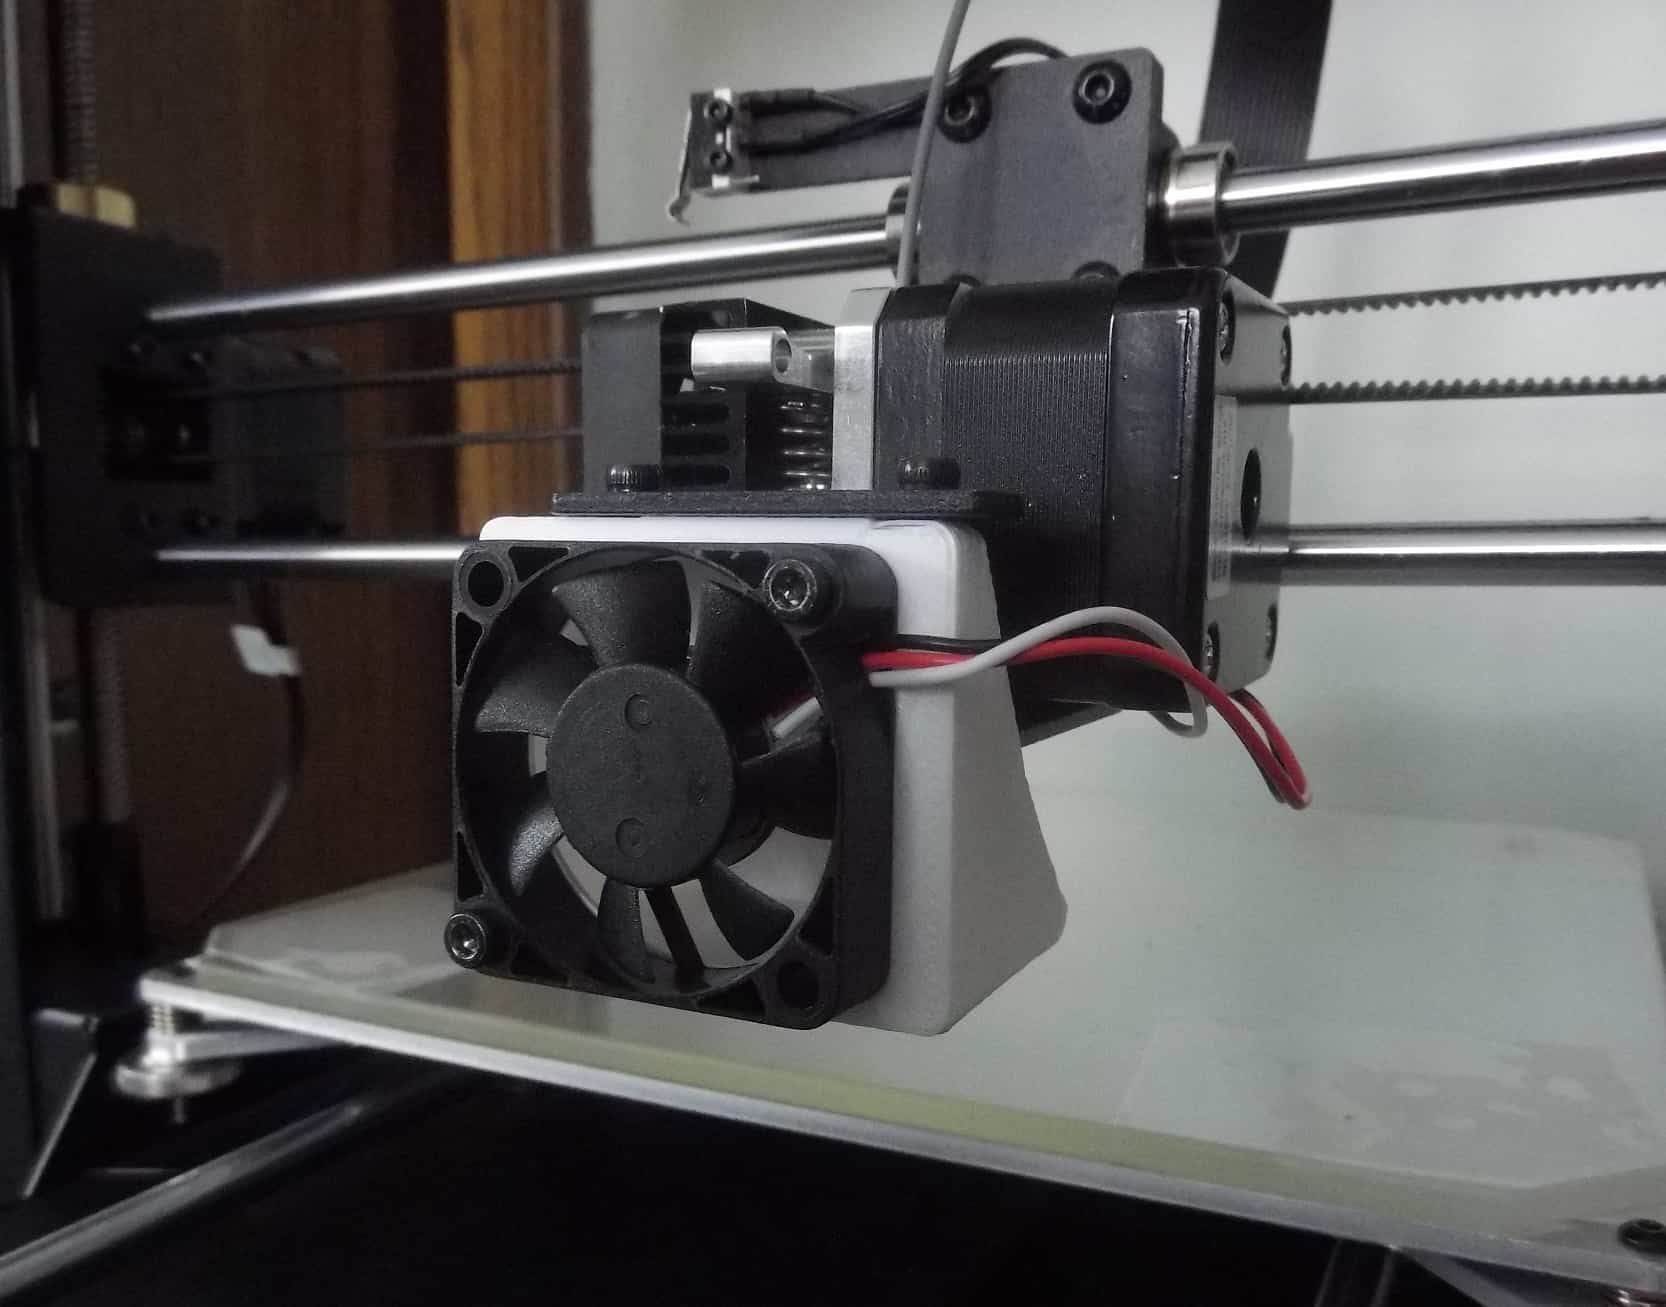 3d printer cooling fan on the cooling fan duct